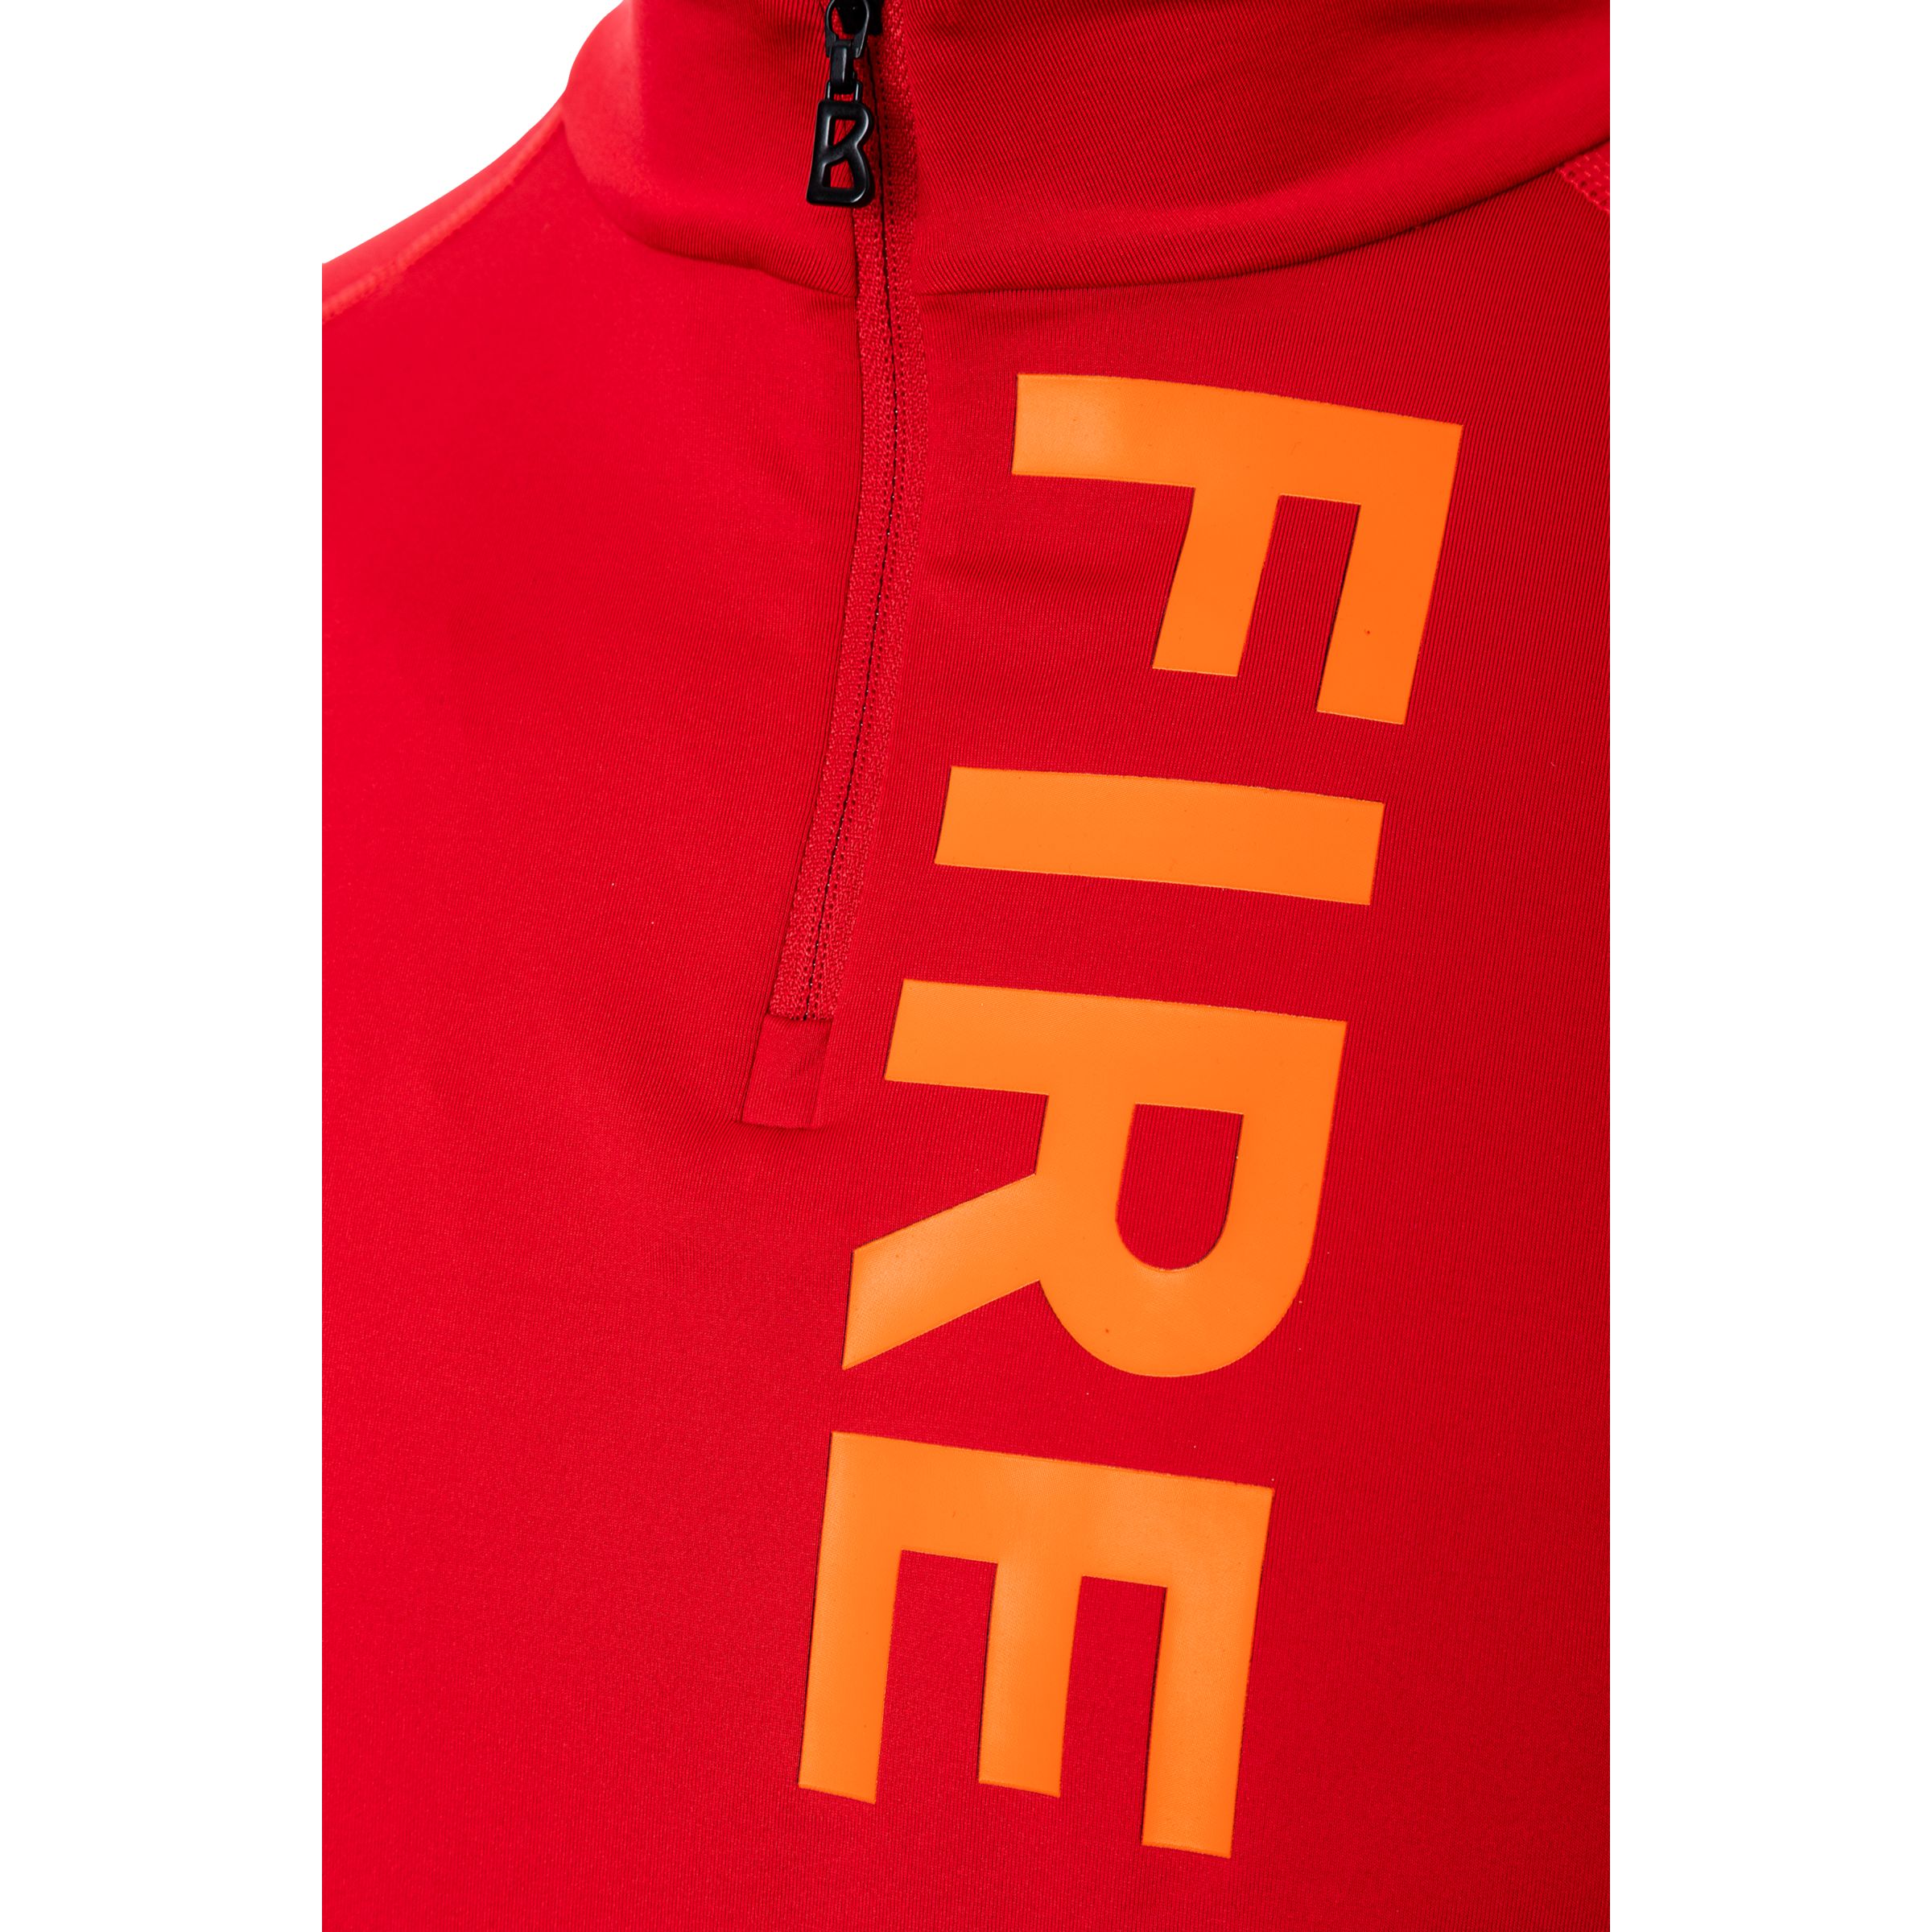 Bluze Termice -  bogner fire and ice MARIAN First Layer